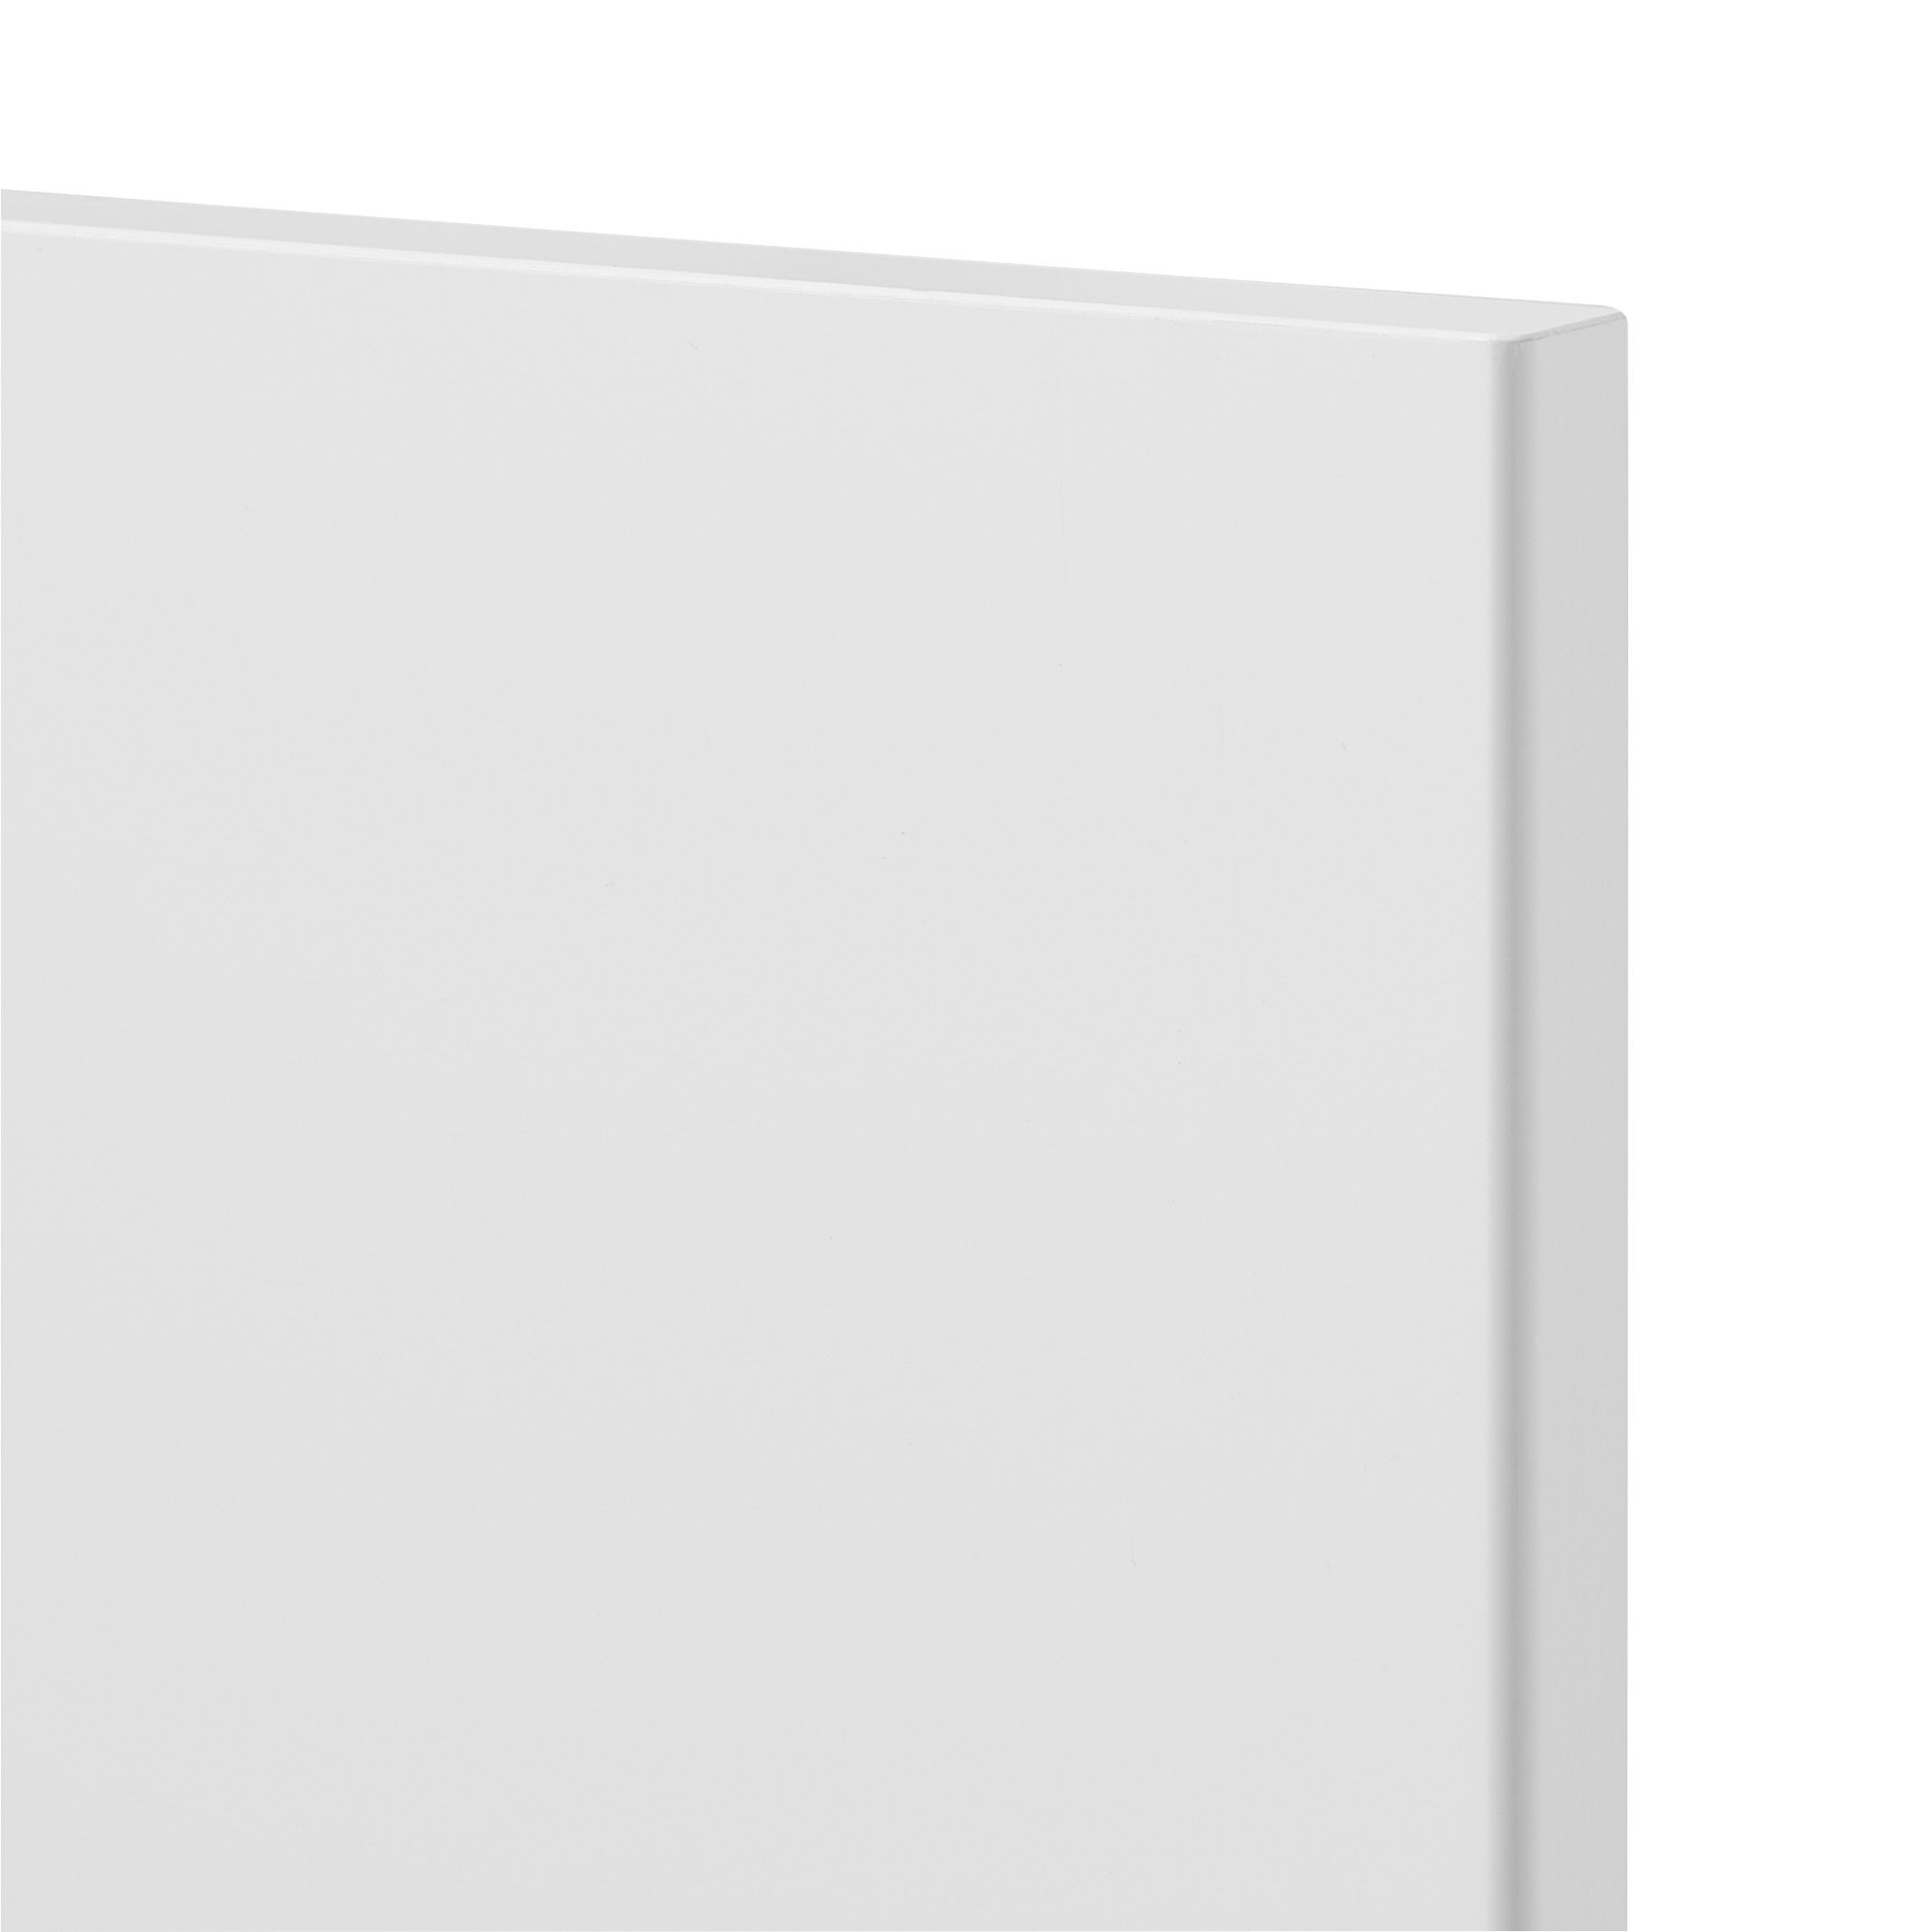 GoodHome Stevia Gloss white slab Drawer front (W)500mm, Pack of 3